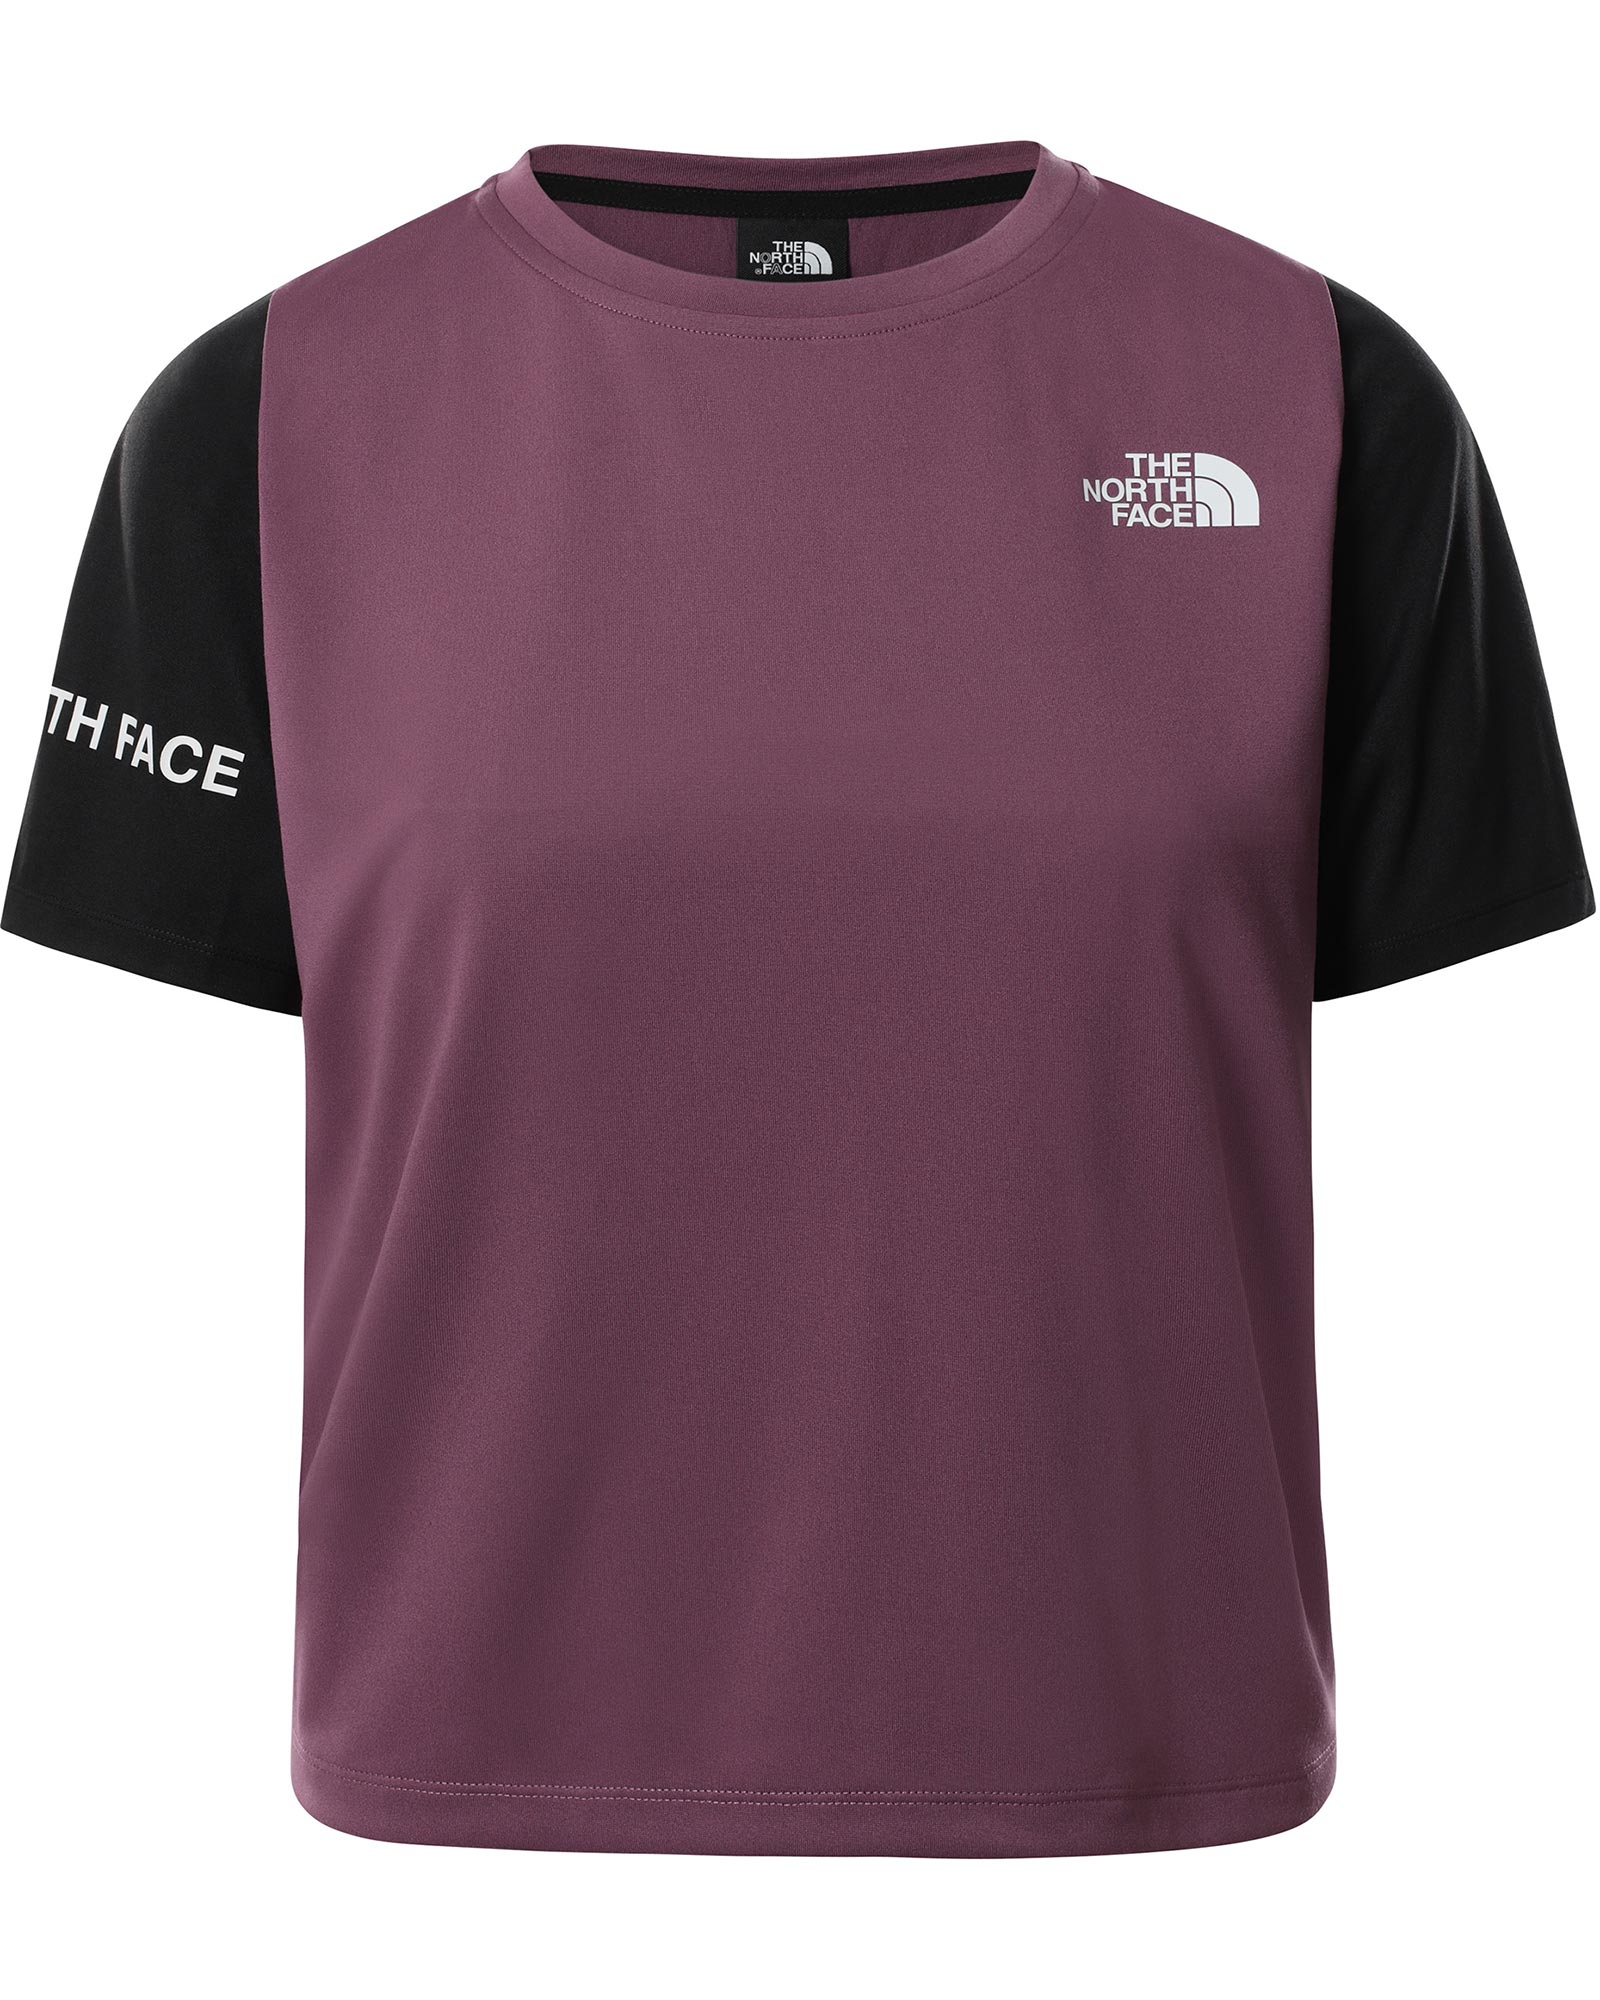 Product image of The North Face Mountain Athletics Women's T-Shirt